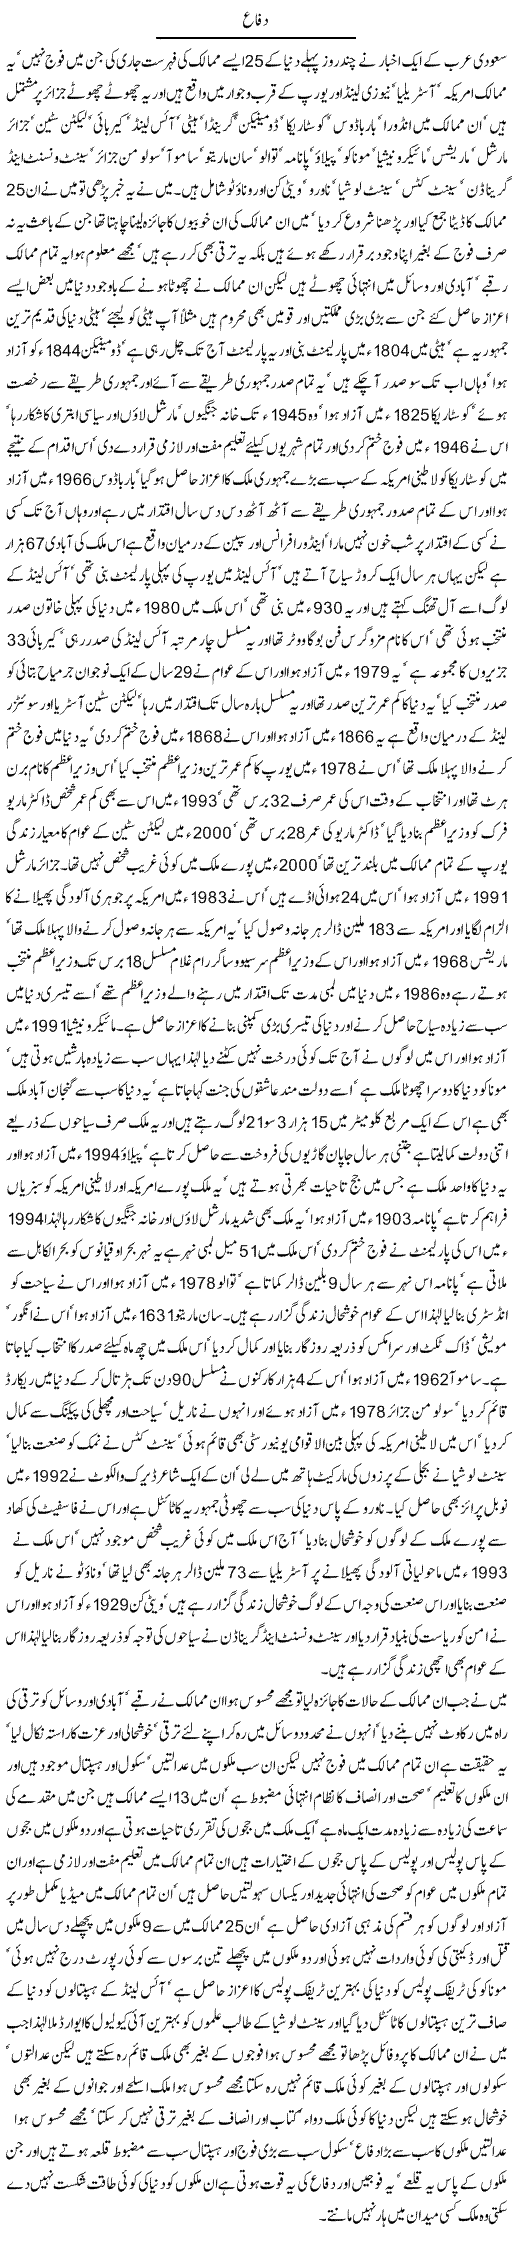 Difa By Javed Chaudhry 18 jan 2007